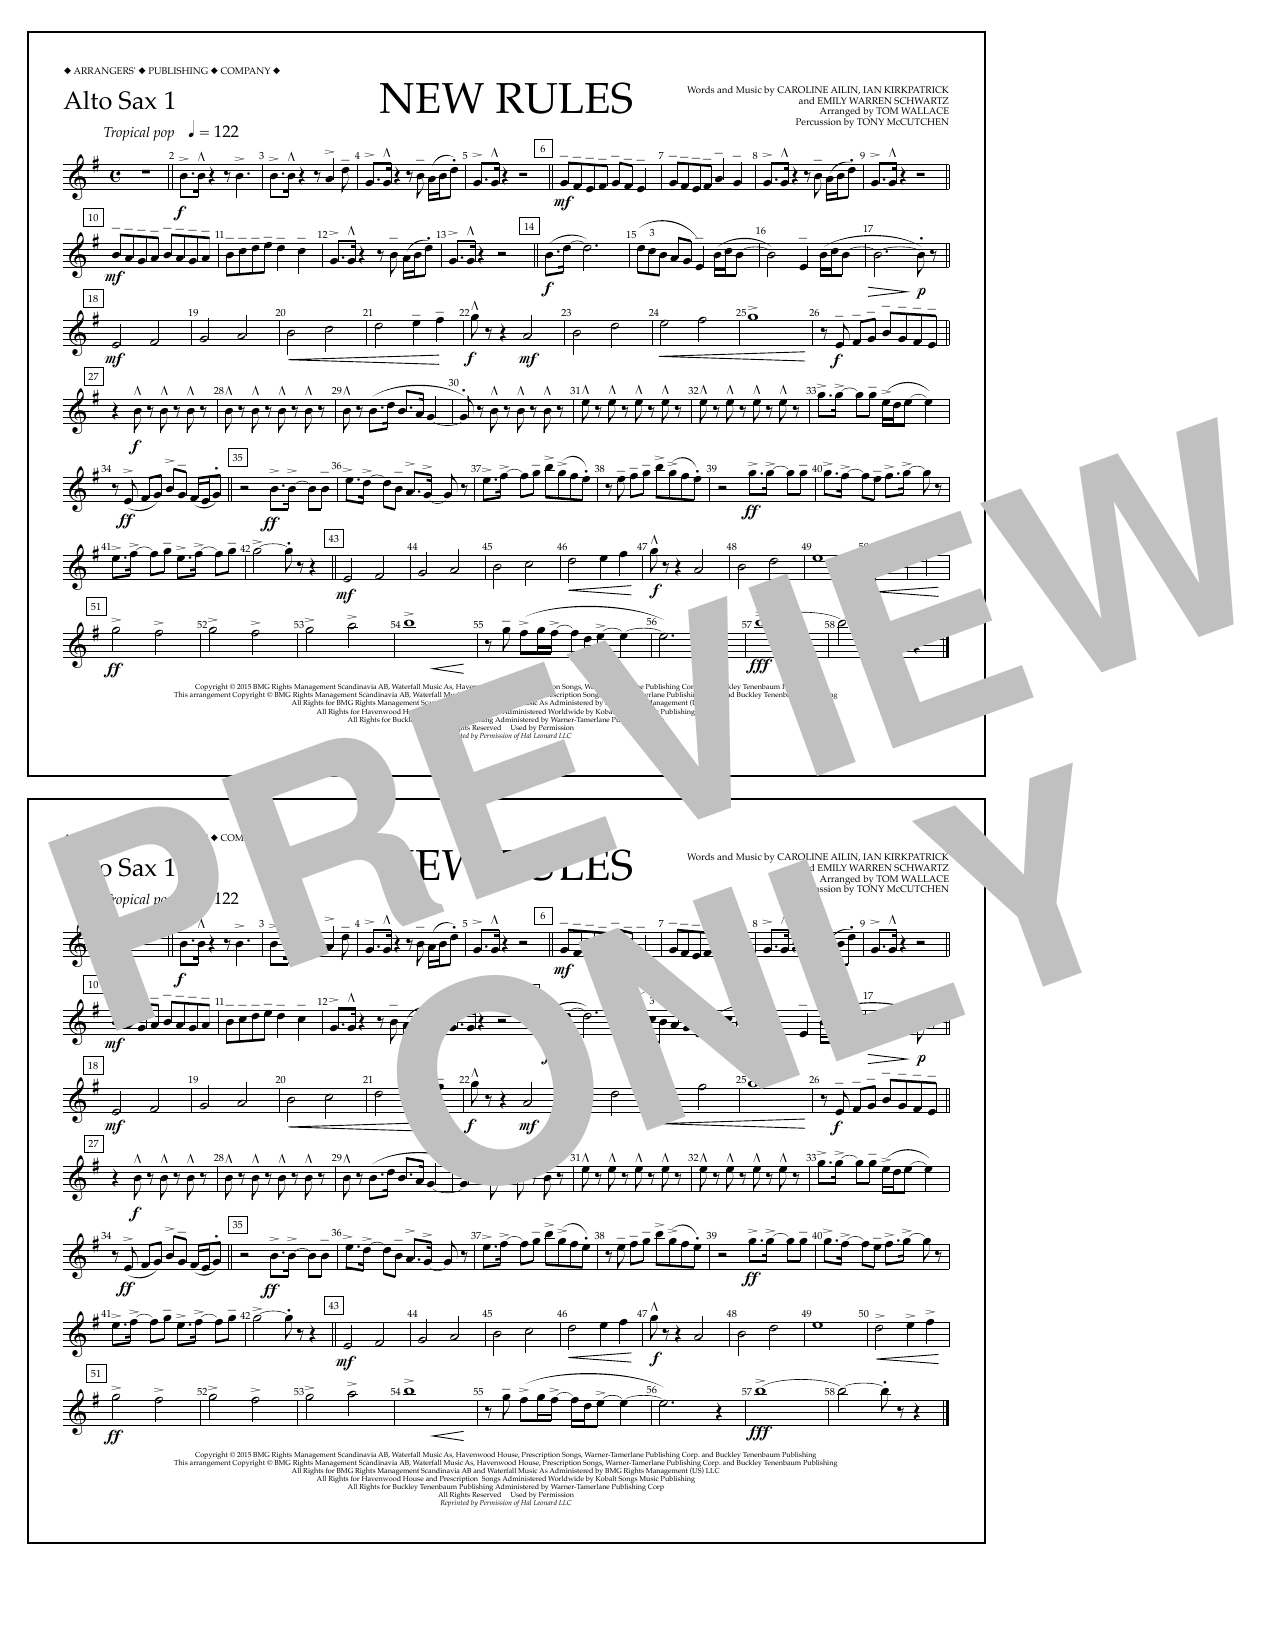 Download Tom Wallace New Rules - Alto Sax 1 Sheet Music